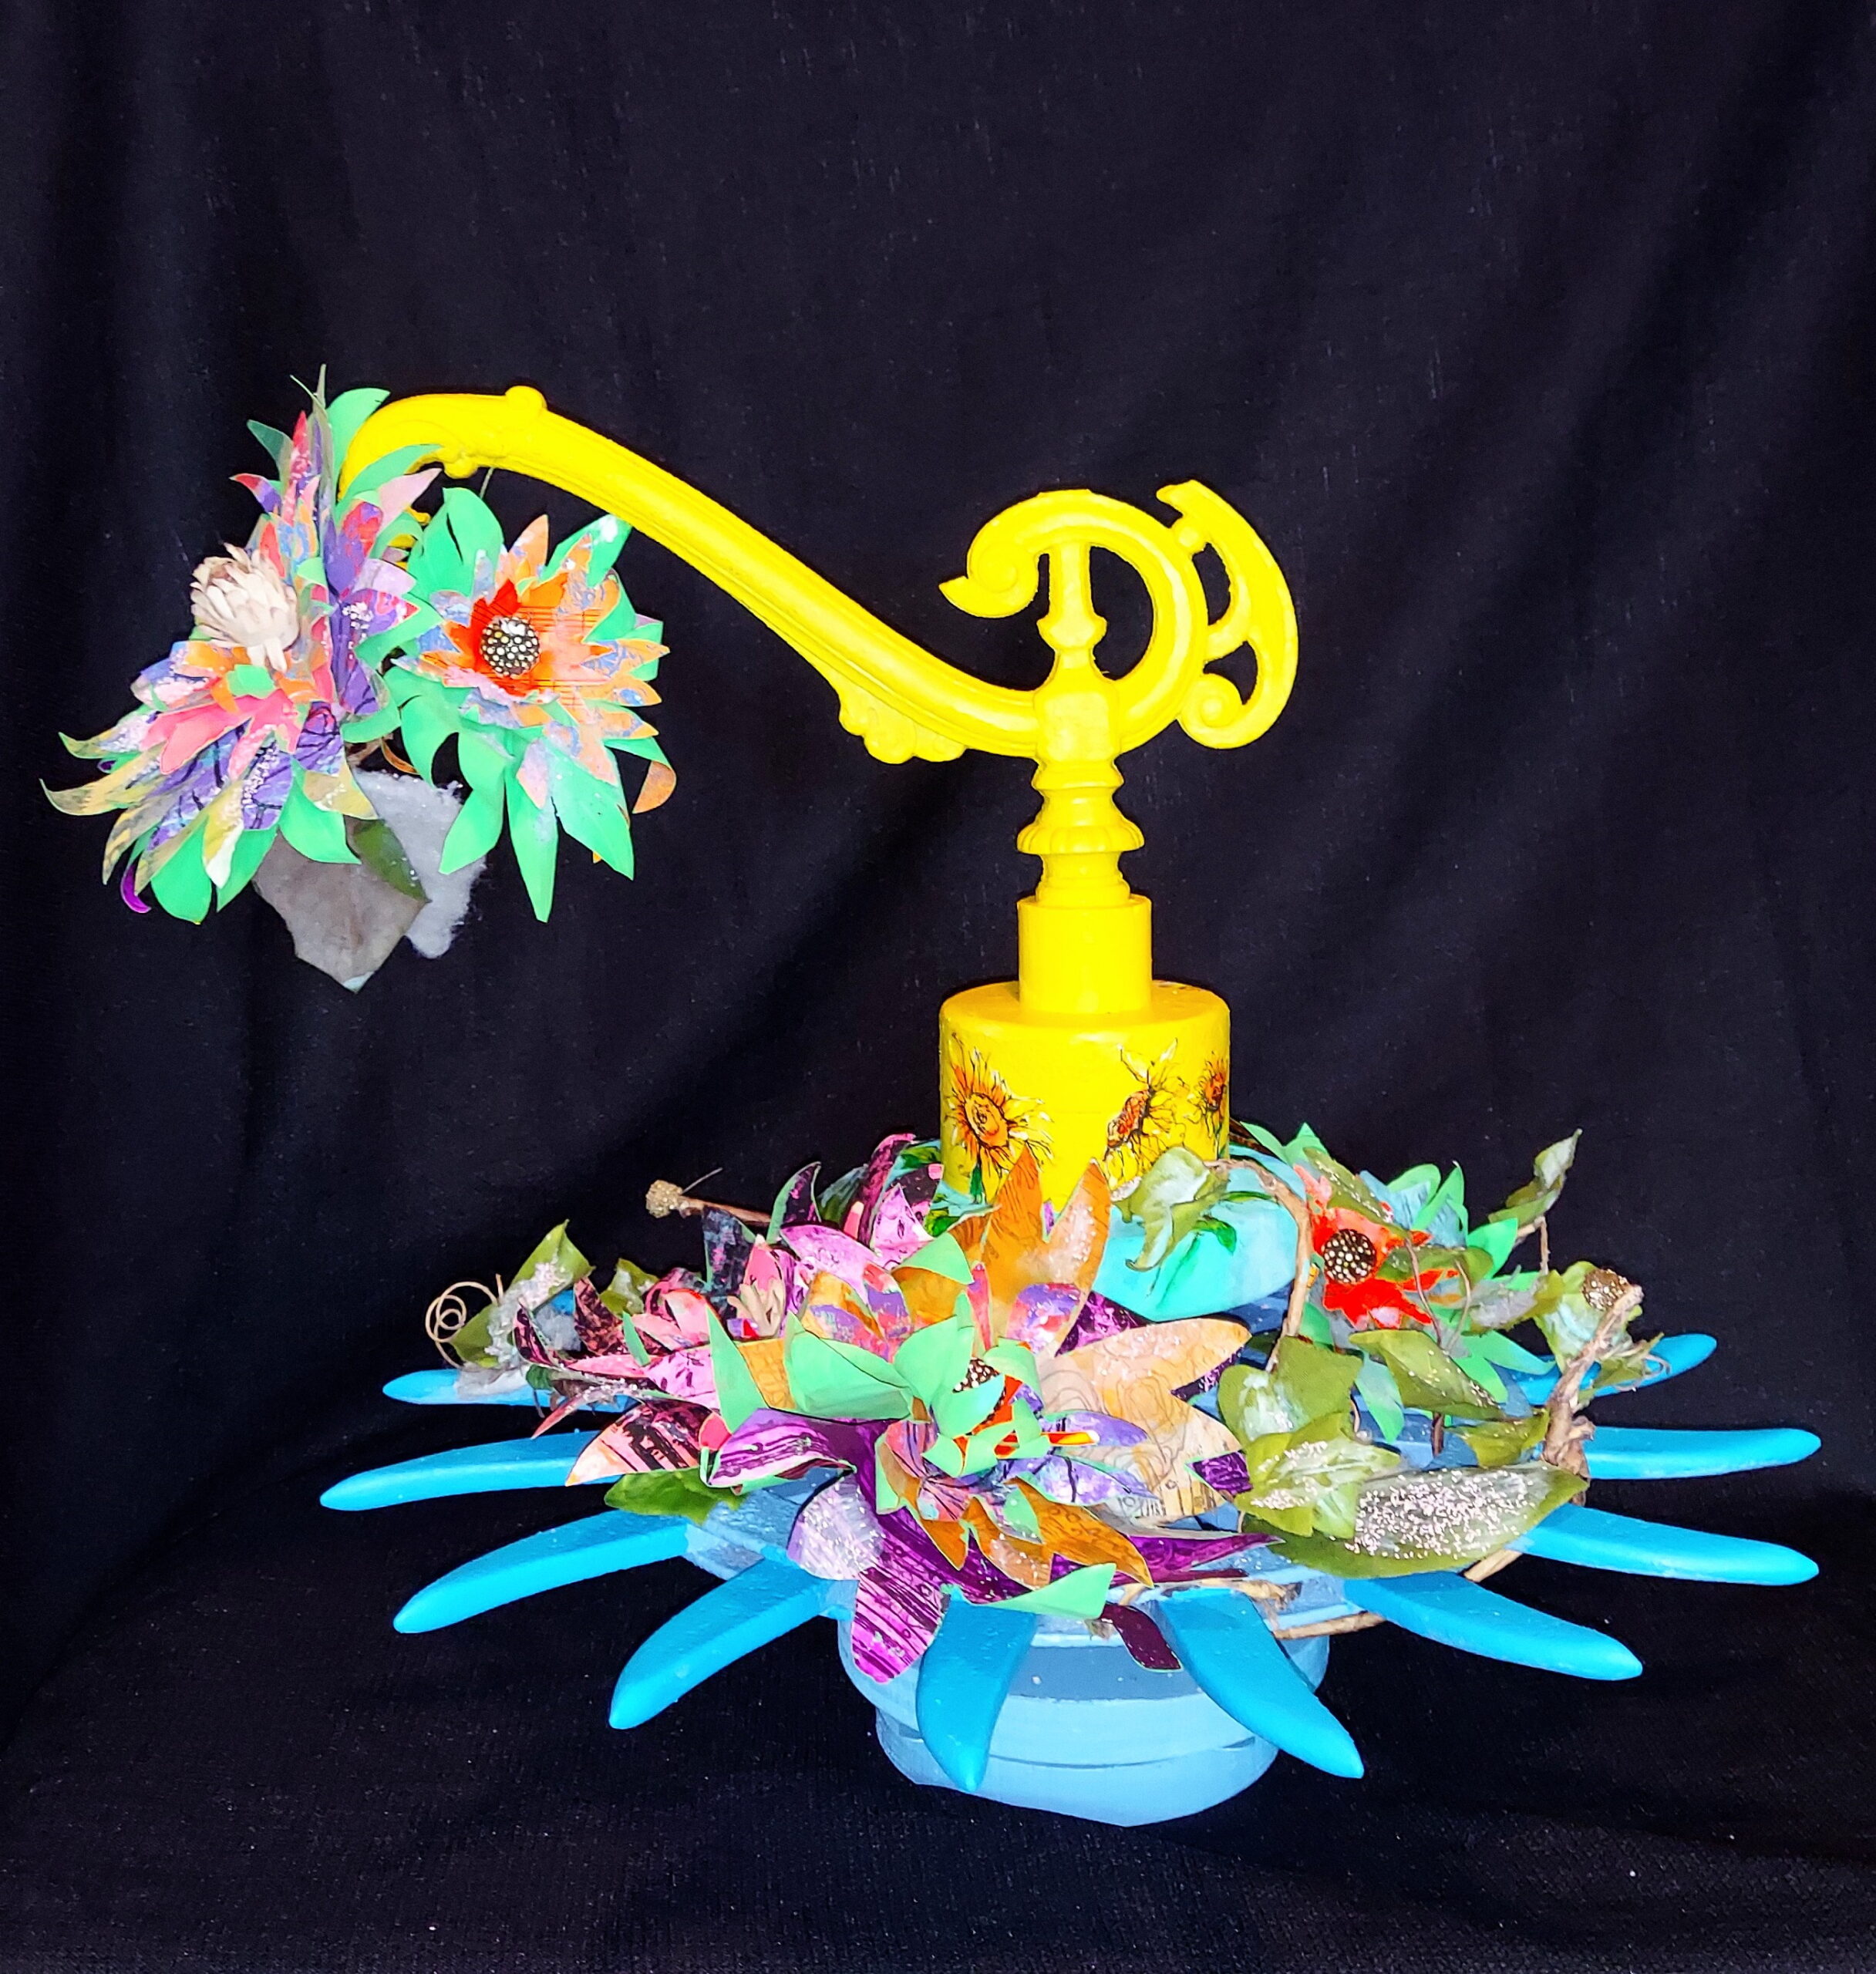 This is a photo of a sculpture with paper flowers that wrap a blue wheel that spins. The flowers are covered with a light dusting of snow which appears to be melting. This sculpture spins on its base and has a wind-up music box that plays the song Edelweiss. This piece shows how liminal art starts conversation. It raises the question, "Why?"